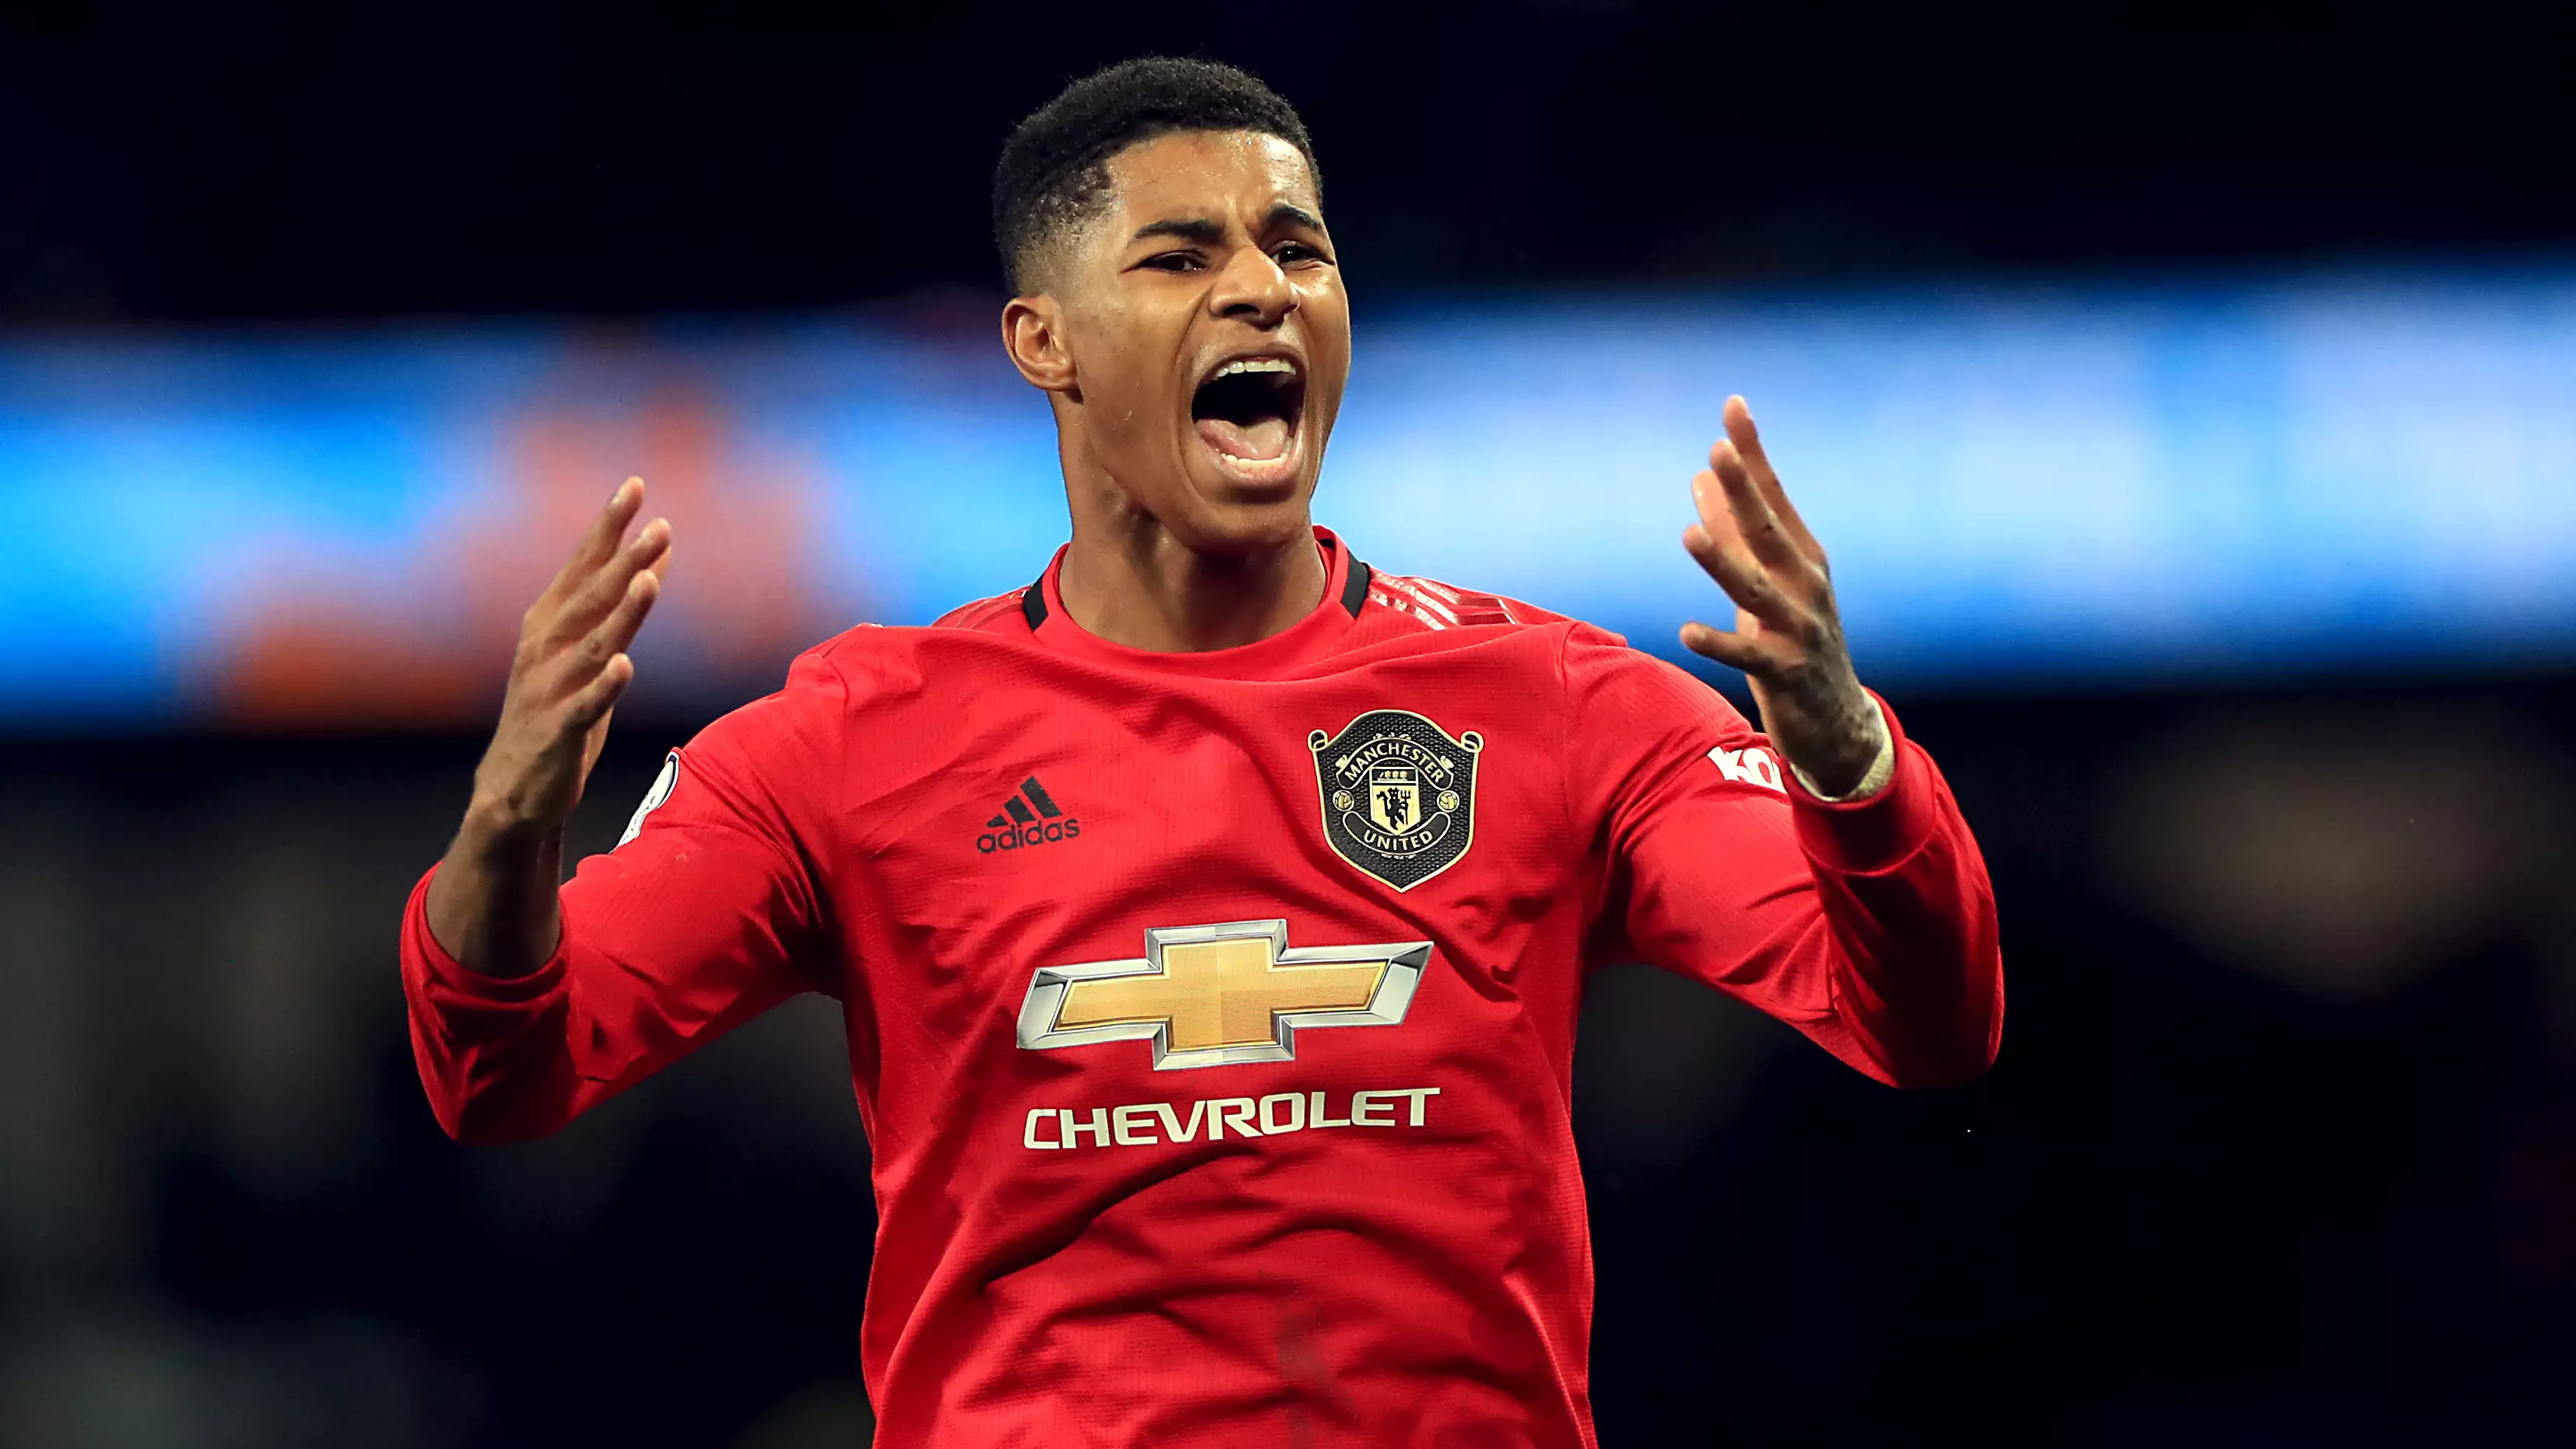 Marcus Rashford Named 'Most Overrated Player In The Premier League' In Twitter Thread